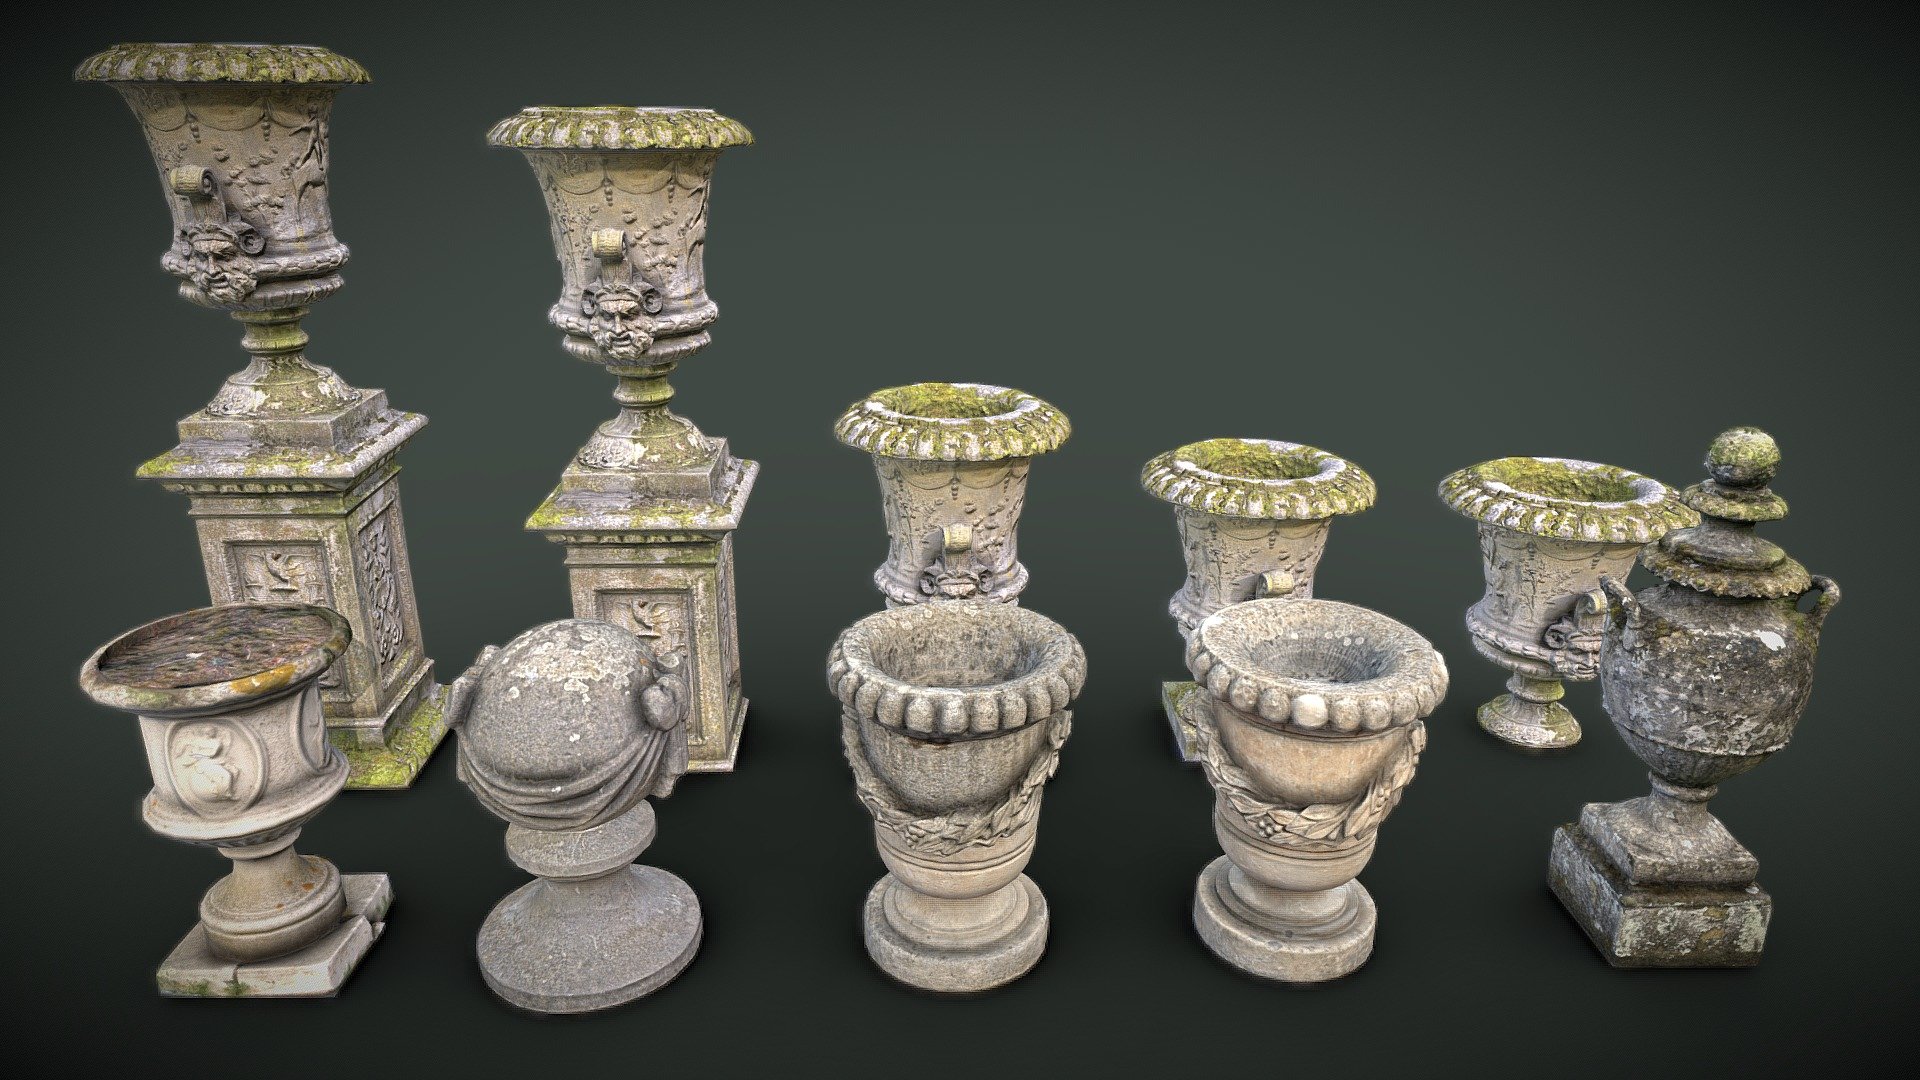 Park Decoration - Vases and a ball.
Photorealistic 3D models with PRB textures and LODs

For real-time applications and games 3d model